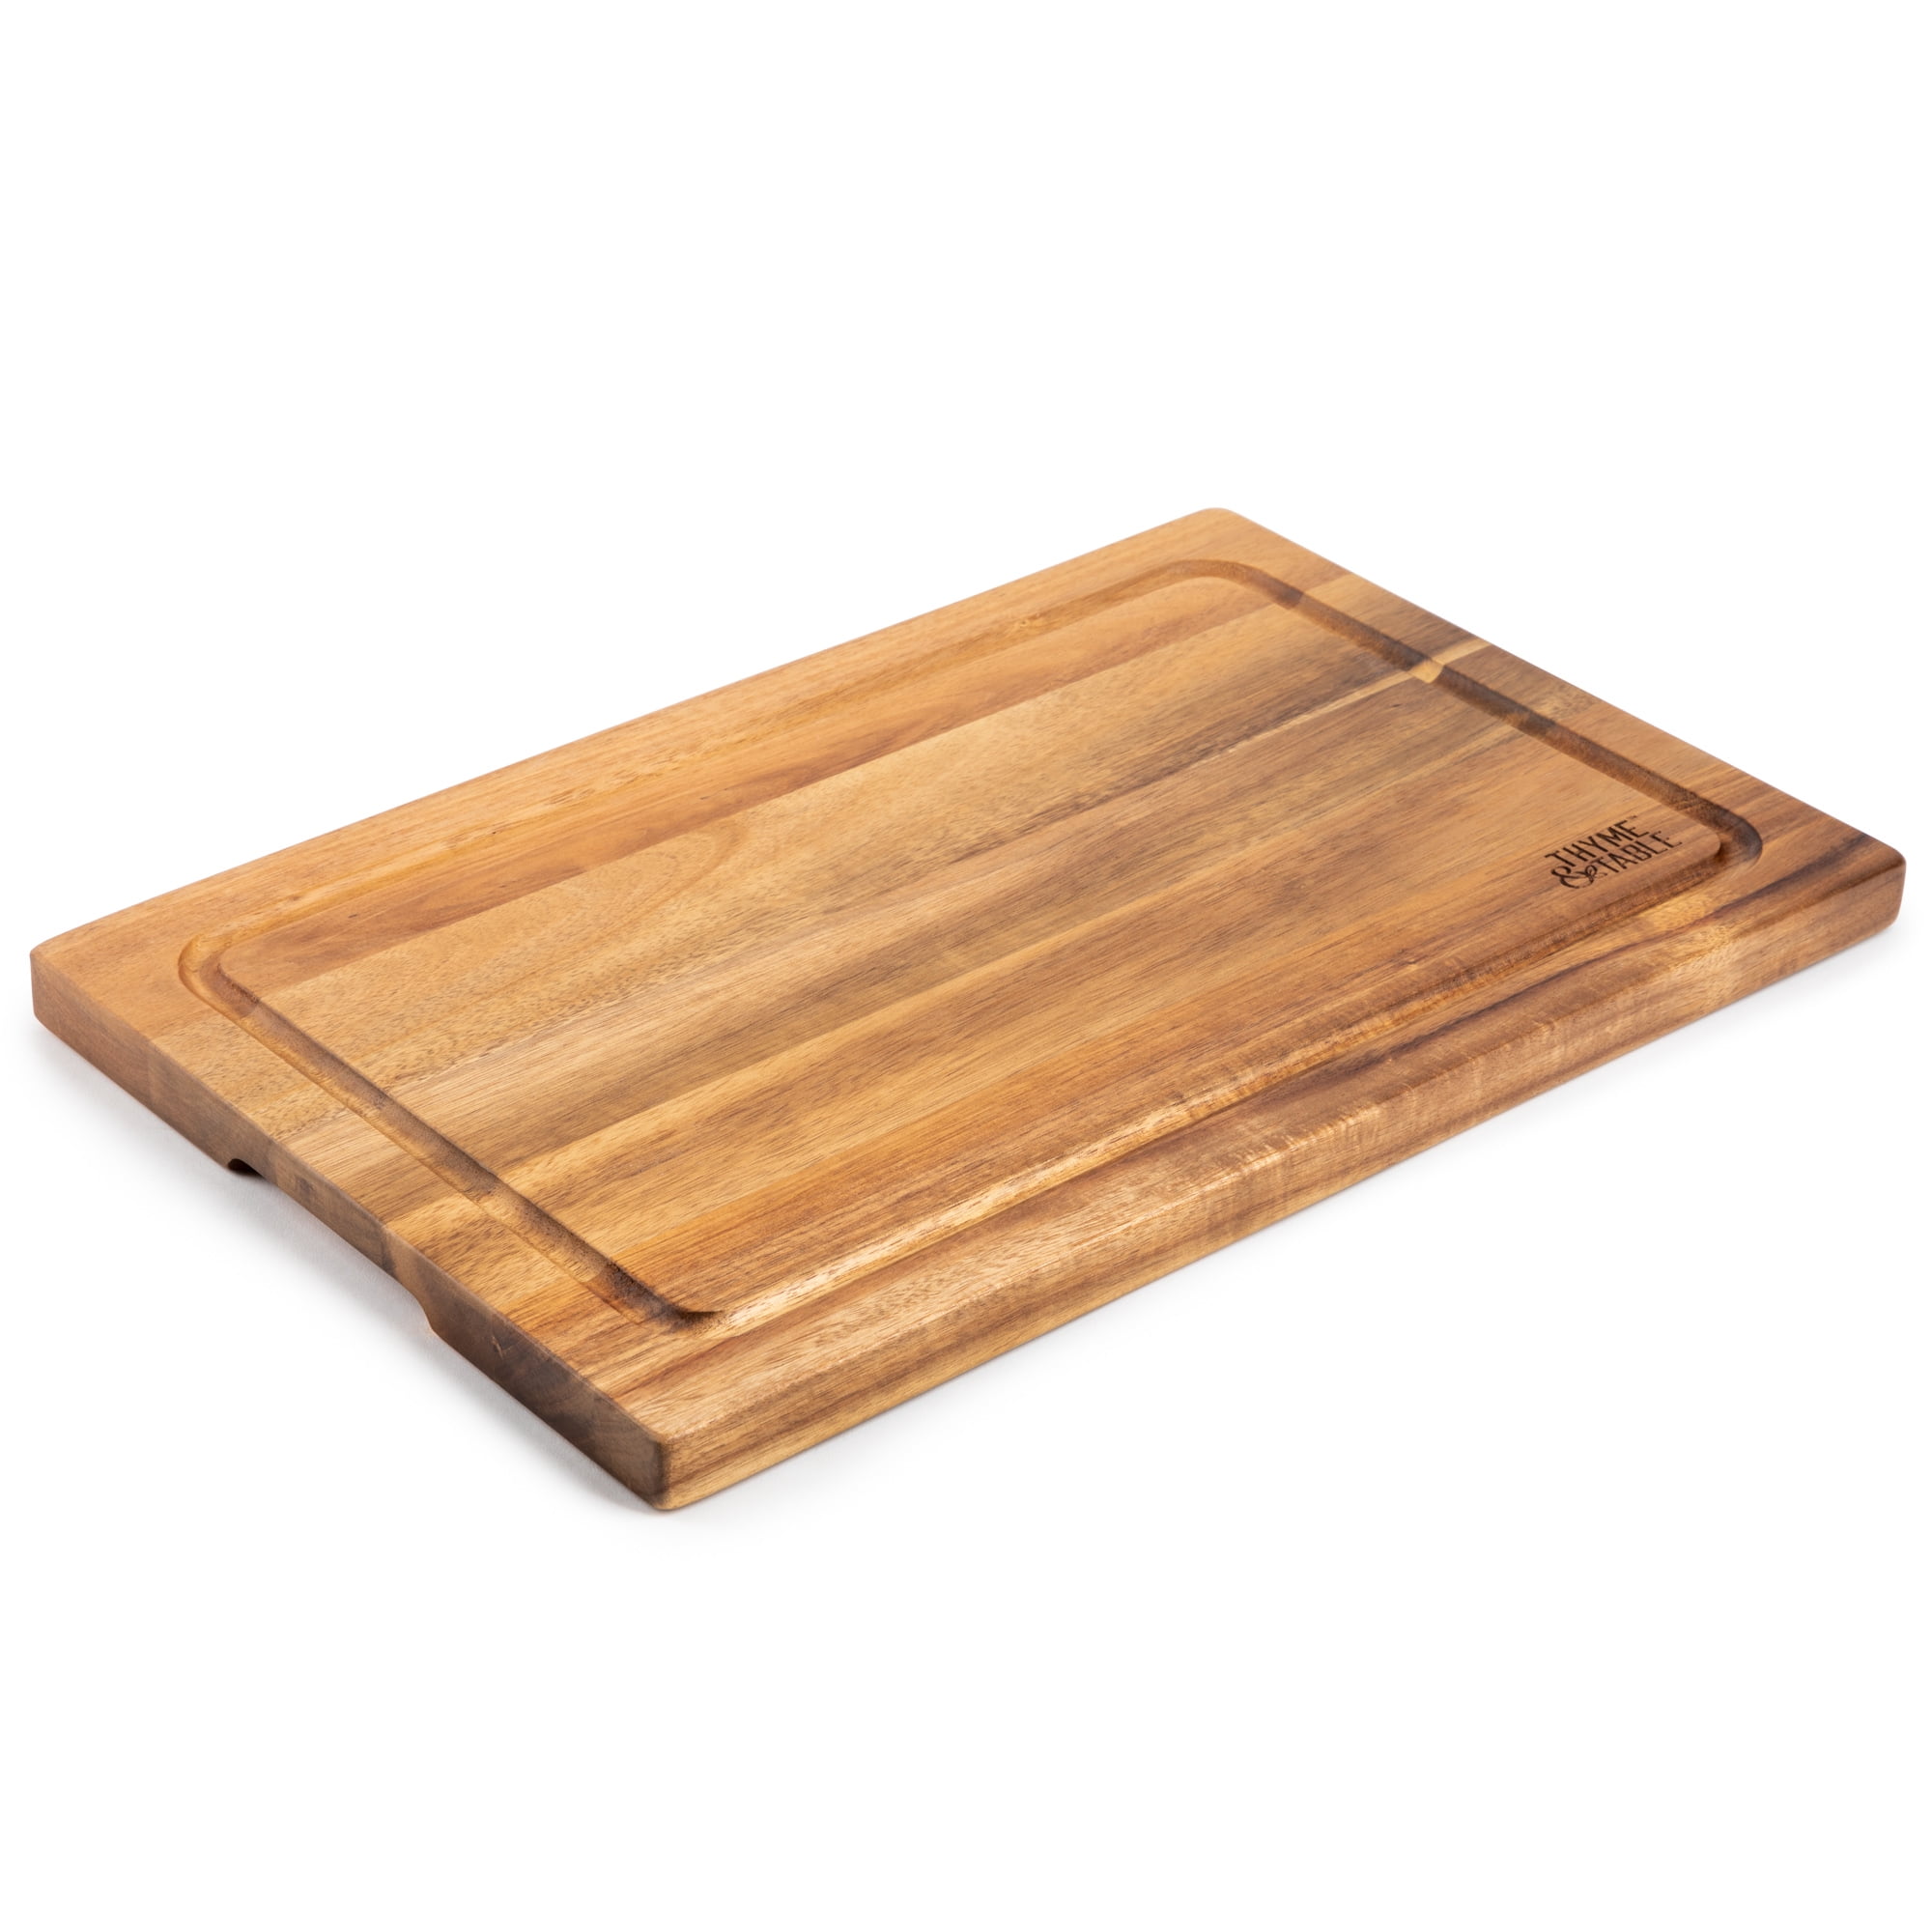 Personalized Cutting Board with Handle - Name on Handle - Gerber Wood  Products